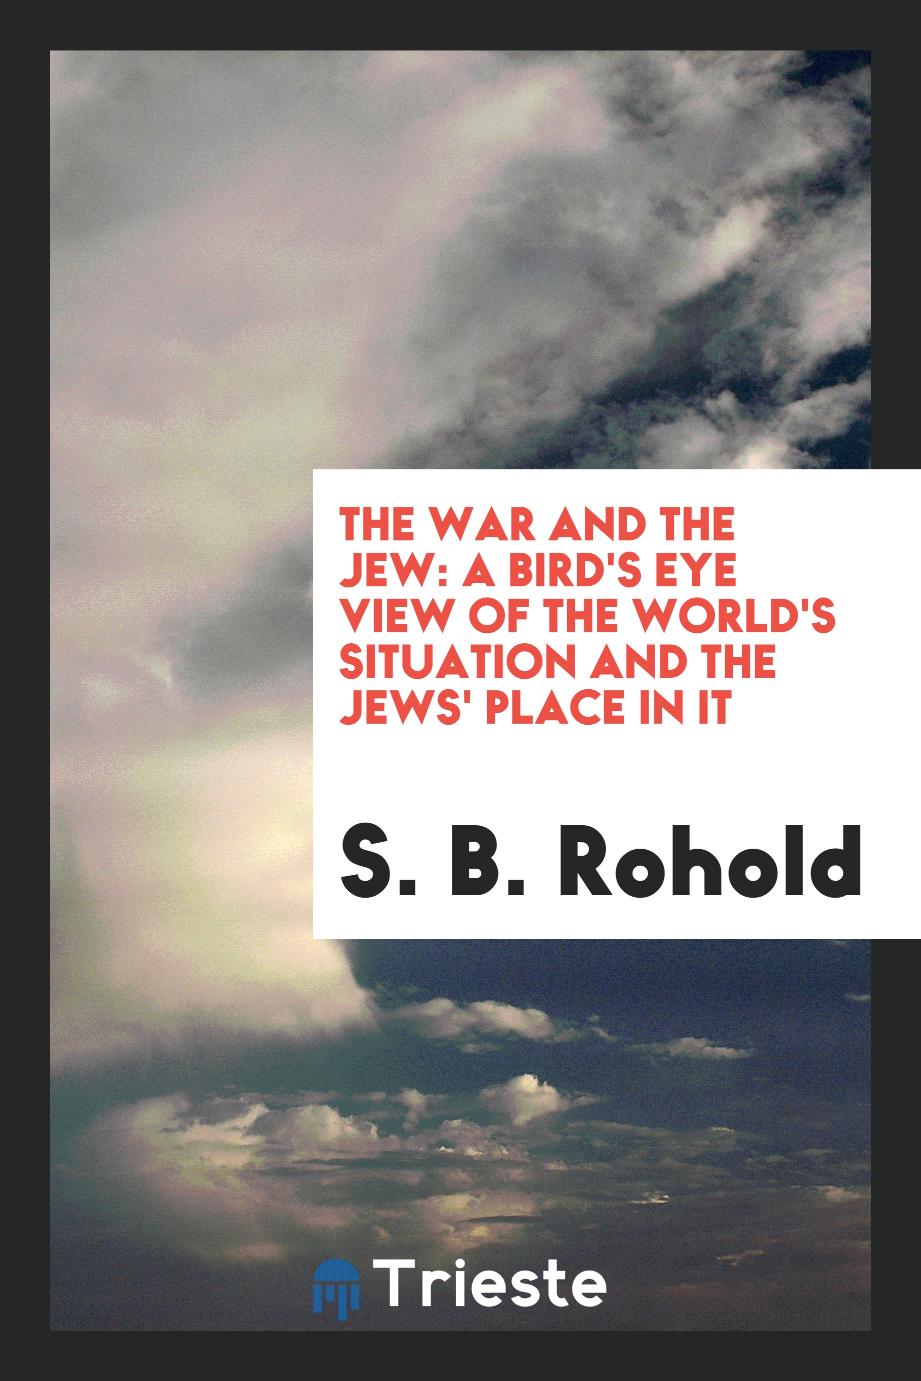 The War and the Jew: A Bird's Eye View of the World's Situation and the Jews' Place in It